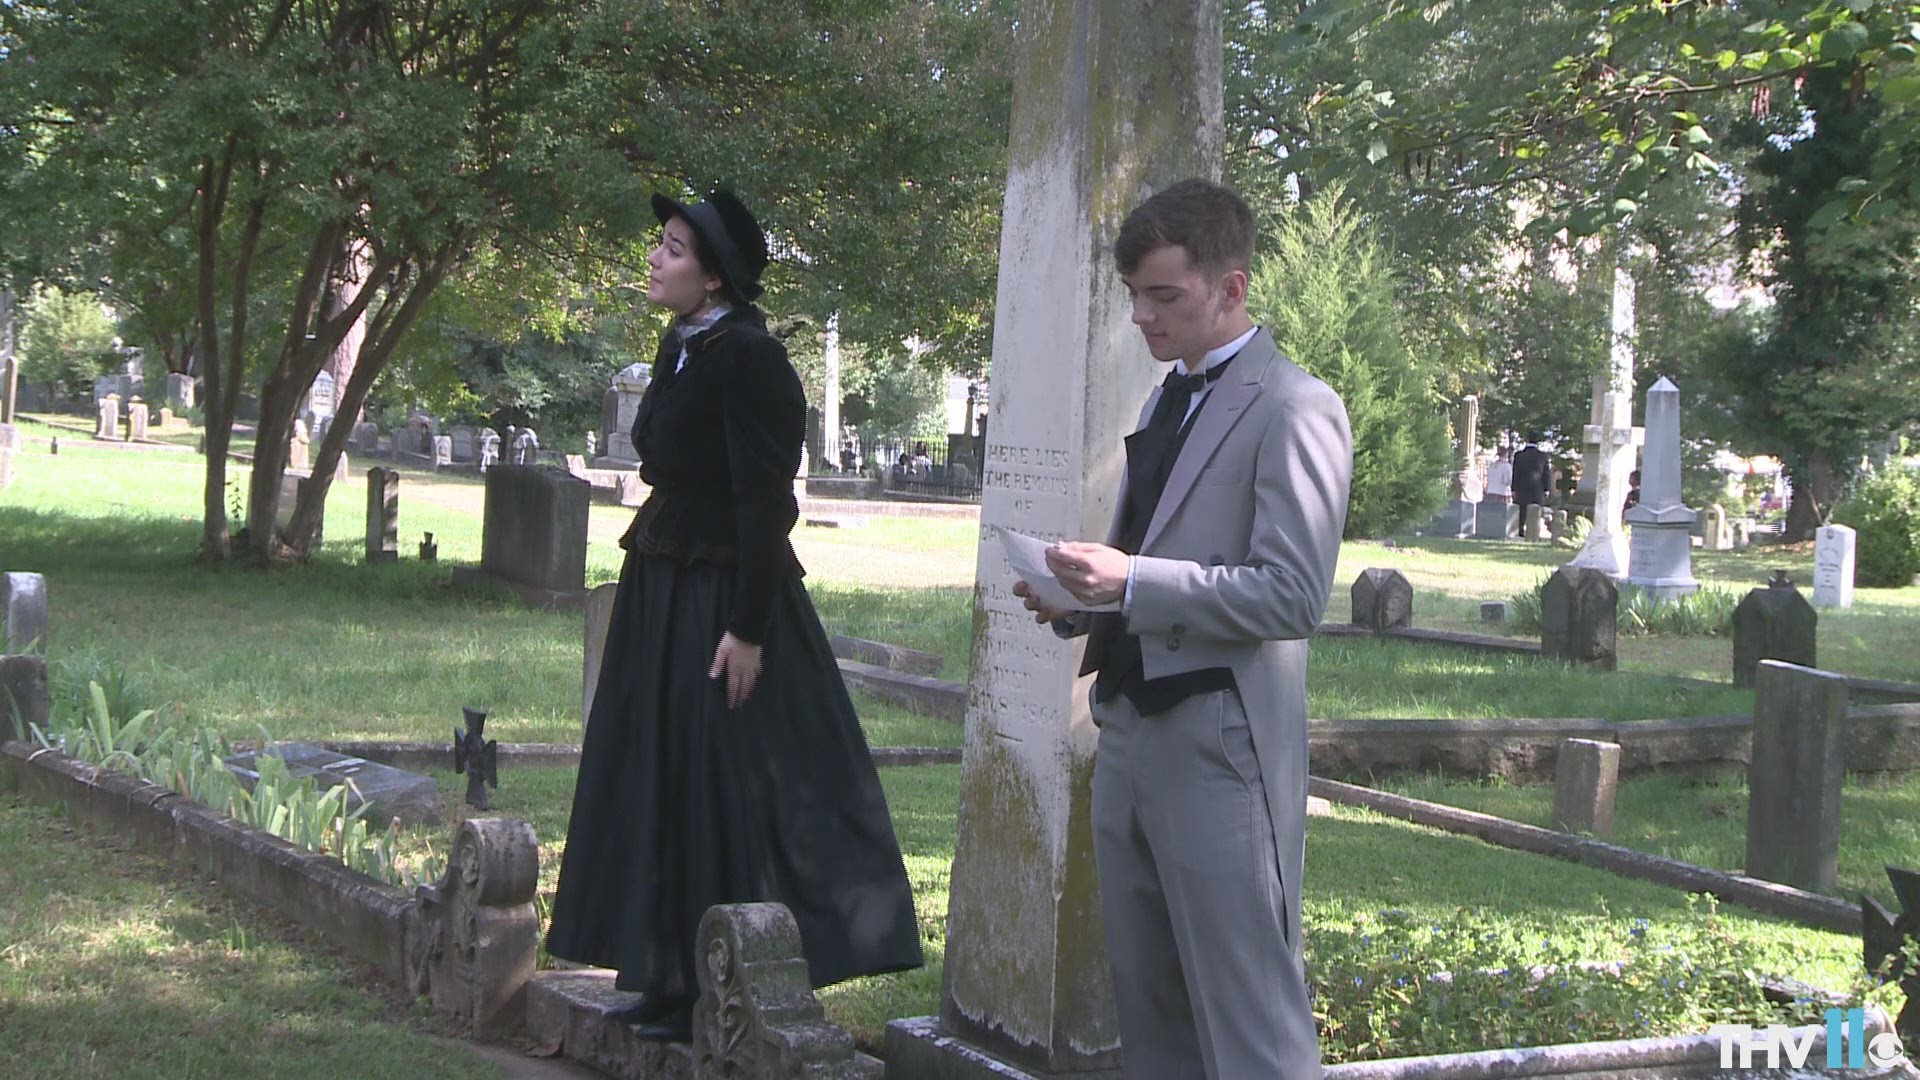 This one-of-a-kind production features historic Arkansas figures such as Eleanor Counts, Quatie Ross, and David O. Dodd.